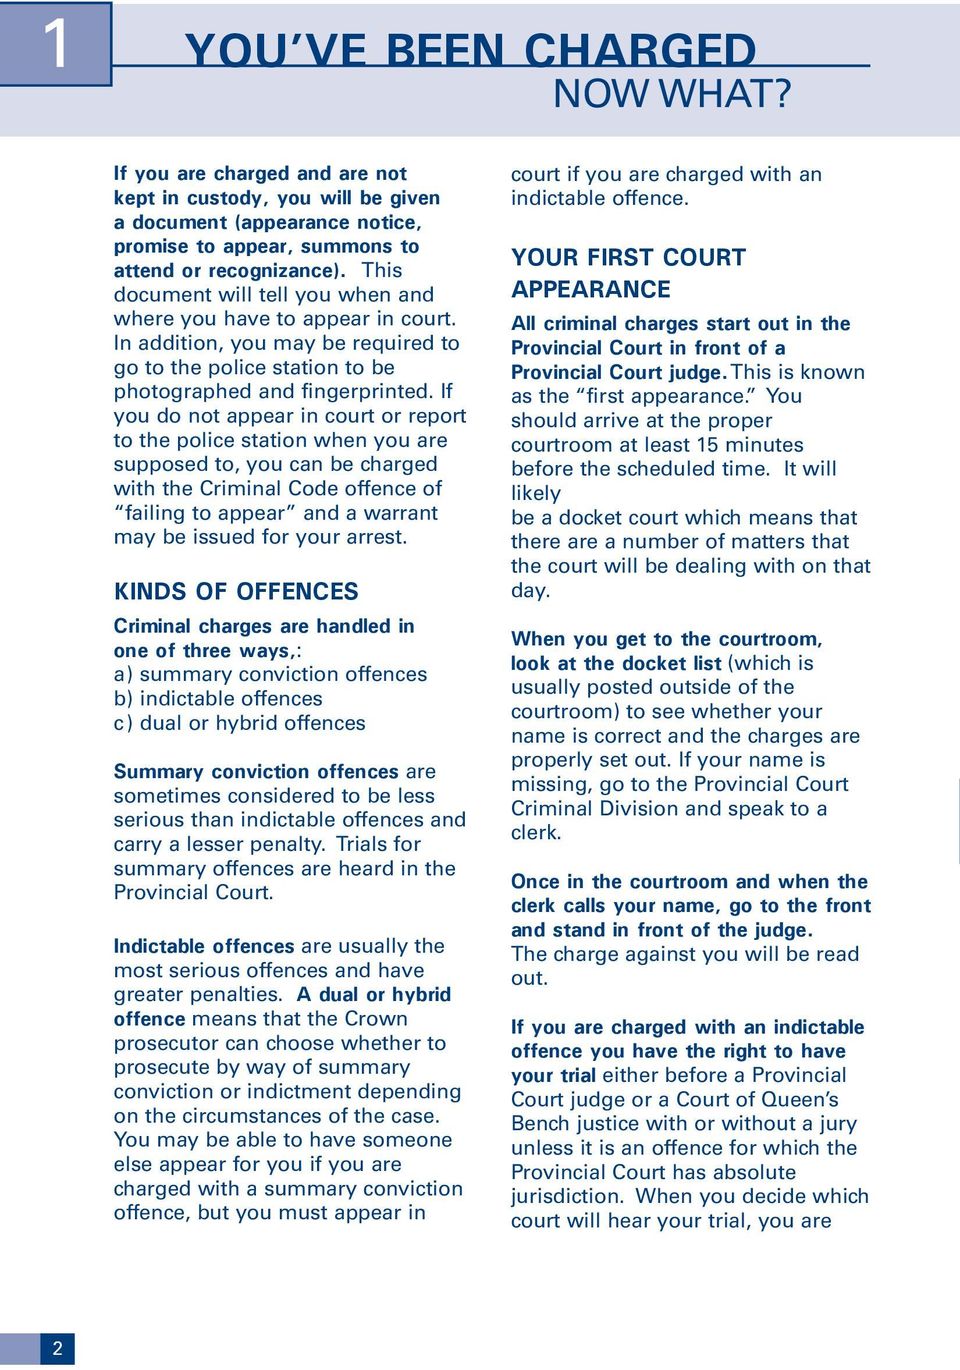 If you do not appear in court or report to the police station when you are supposed to, you can be charged with the Criminal Code offence of failing to appear and a warrant may be issued for your